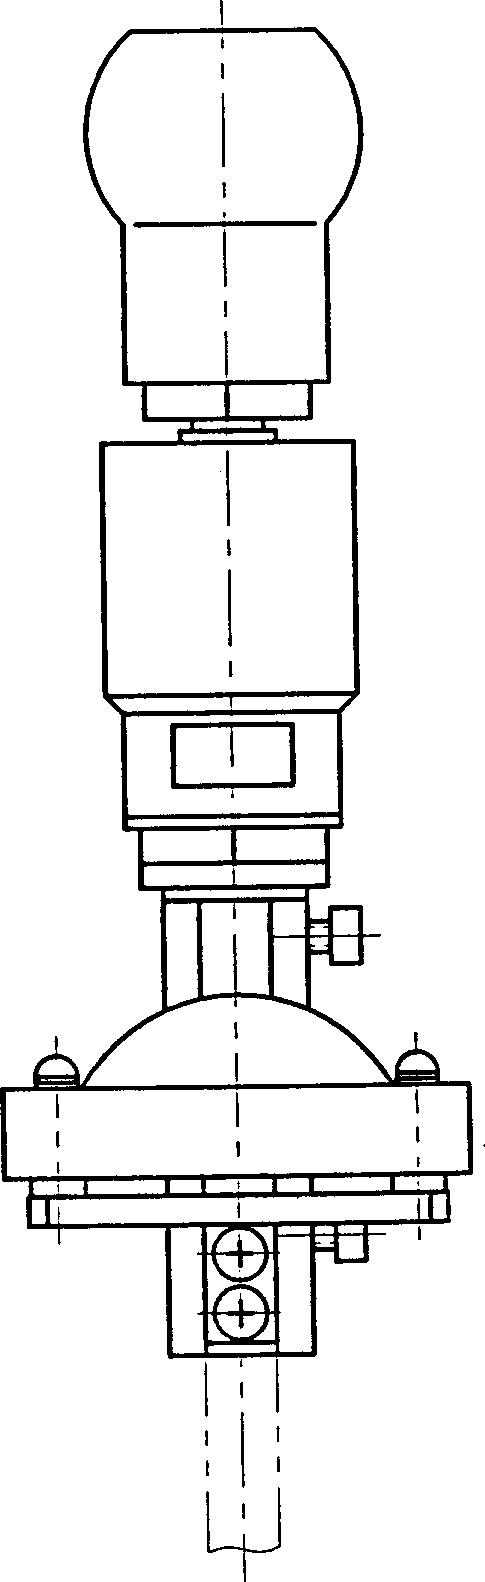 Detection apparatus for operation force on shift-handle and corresponding displacement